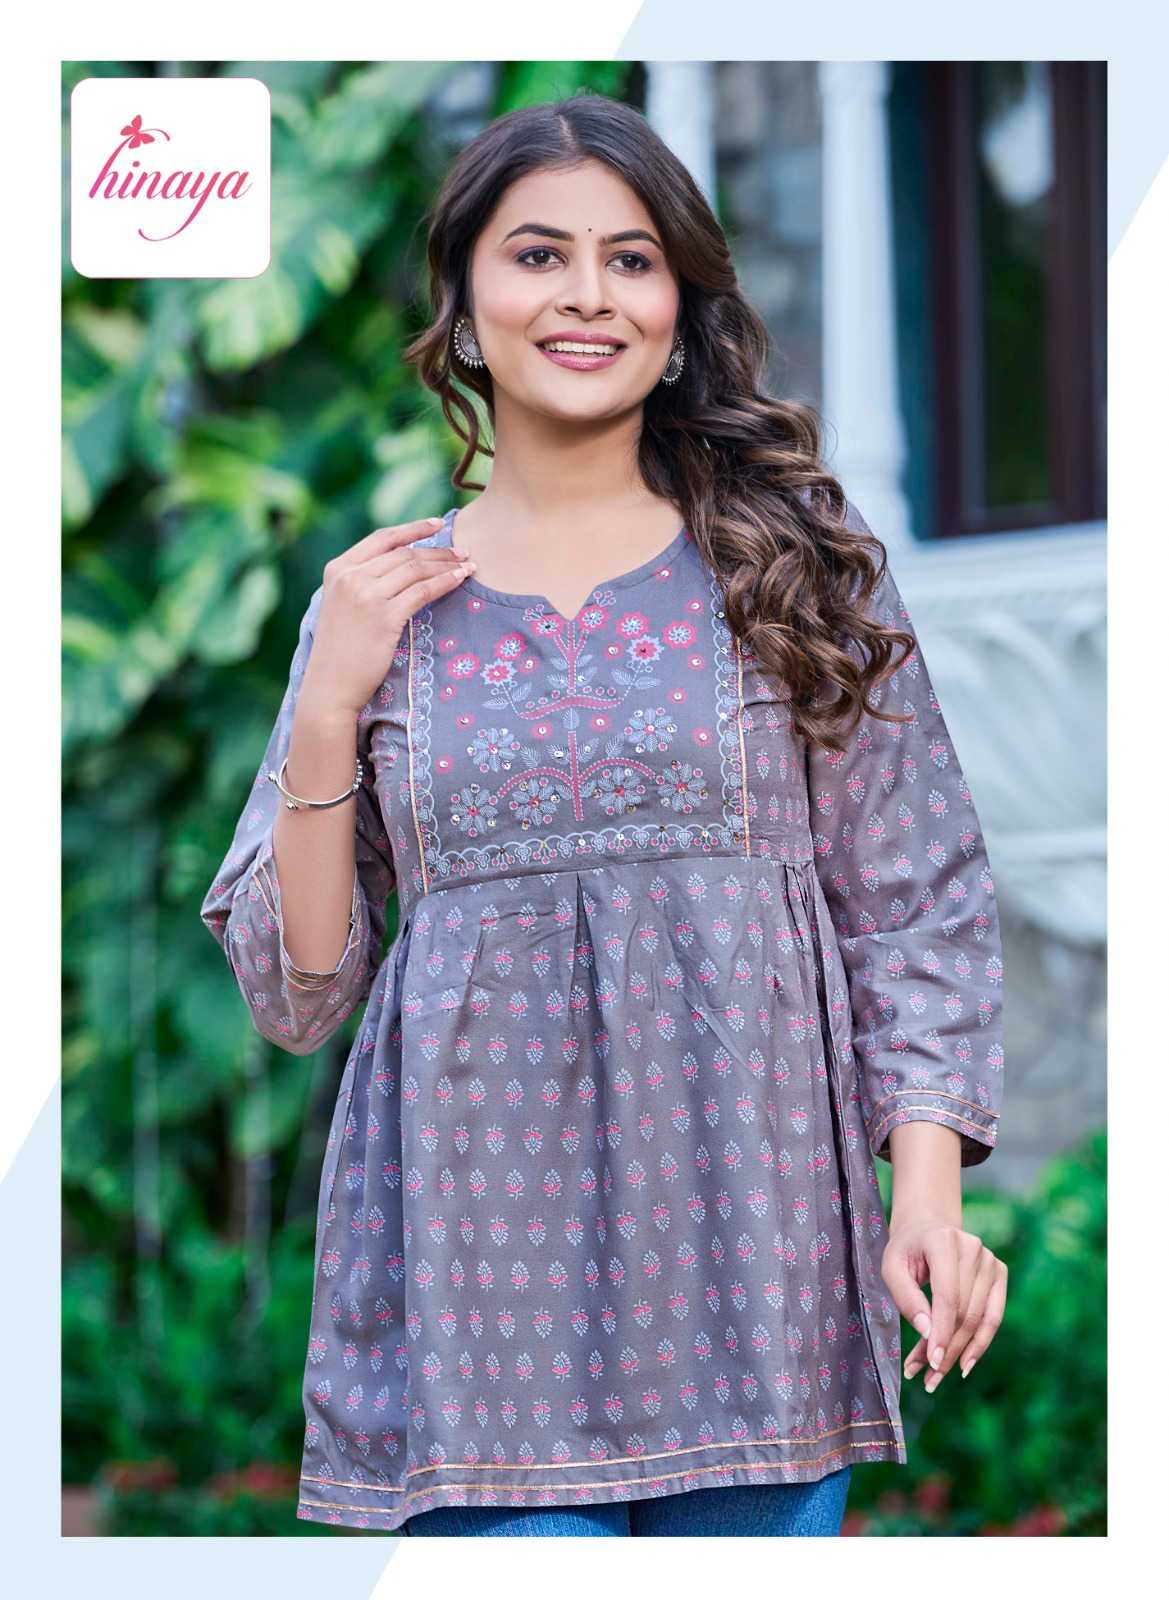 hinaya present fashion 4 you vol 10 new launch classy look trendy western rayon short tops collection 